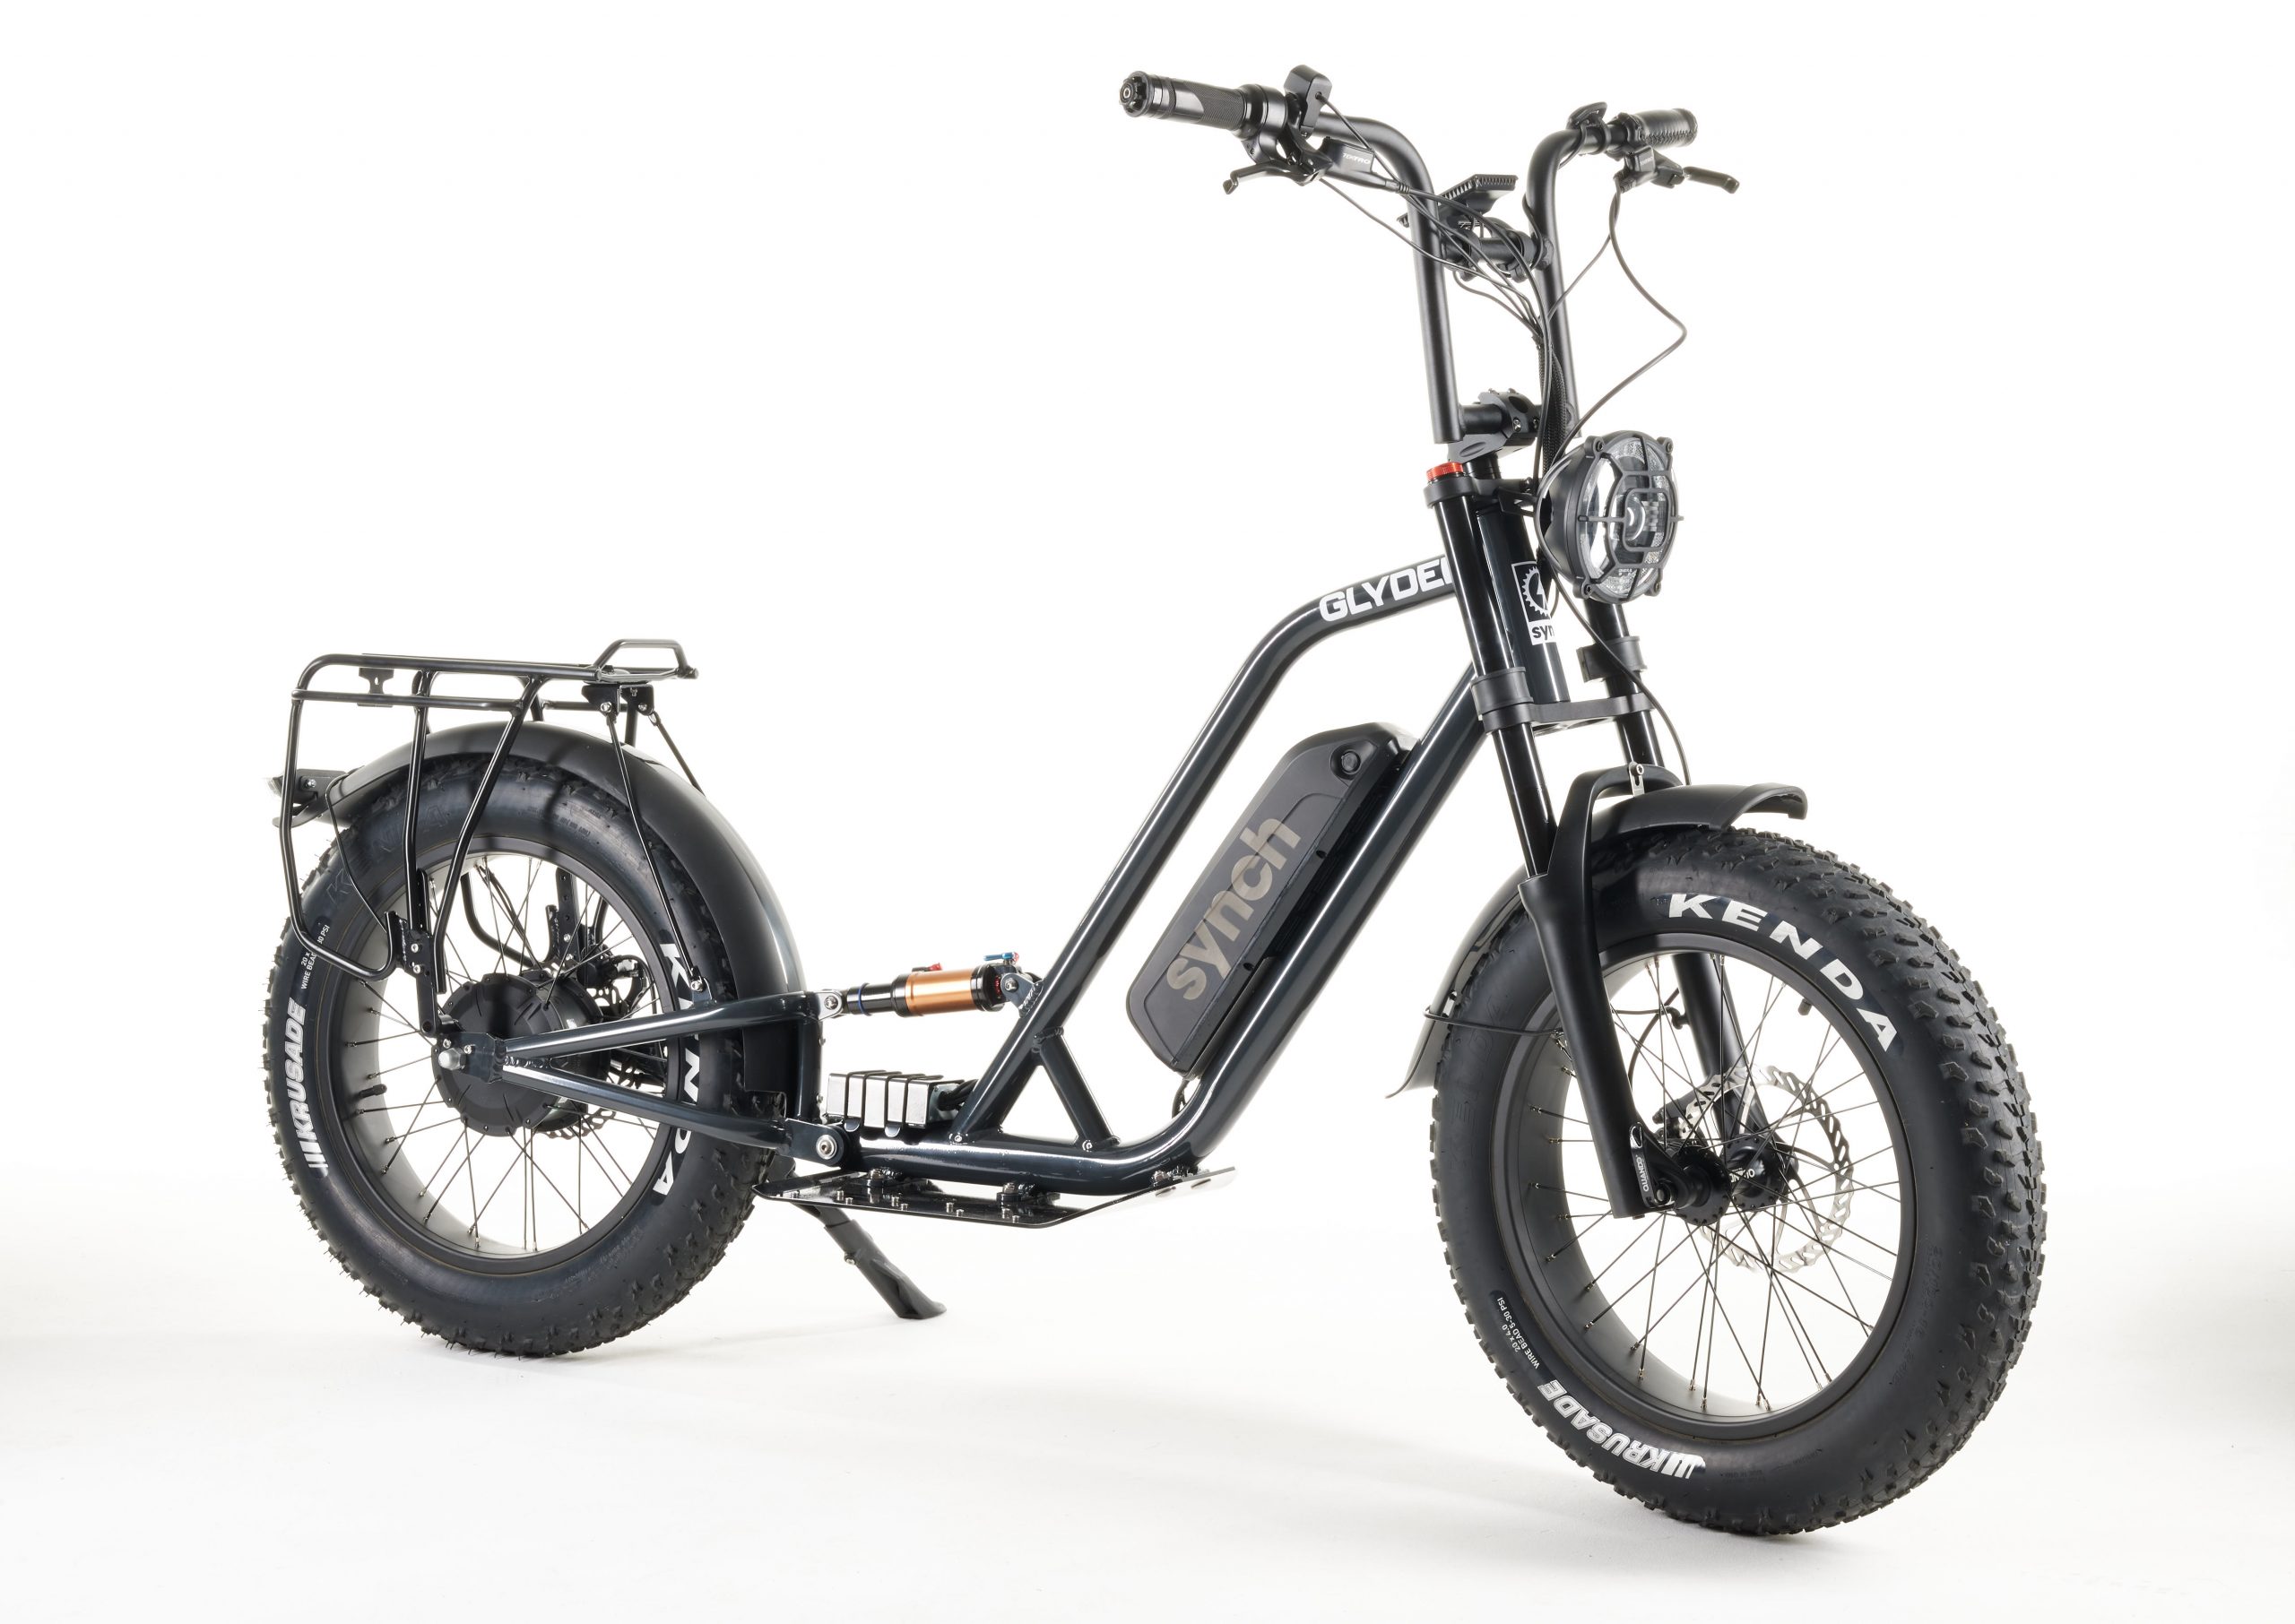 The Glyder Super Off Road Scooter